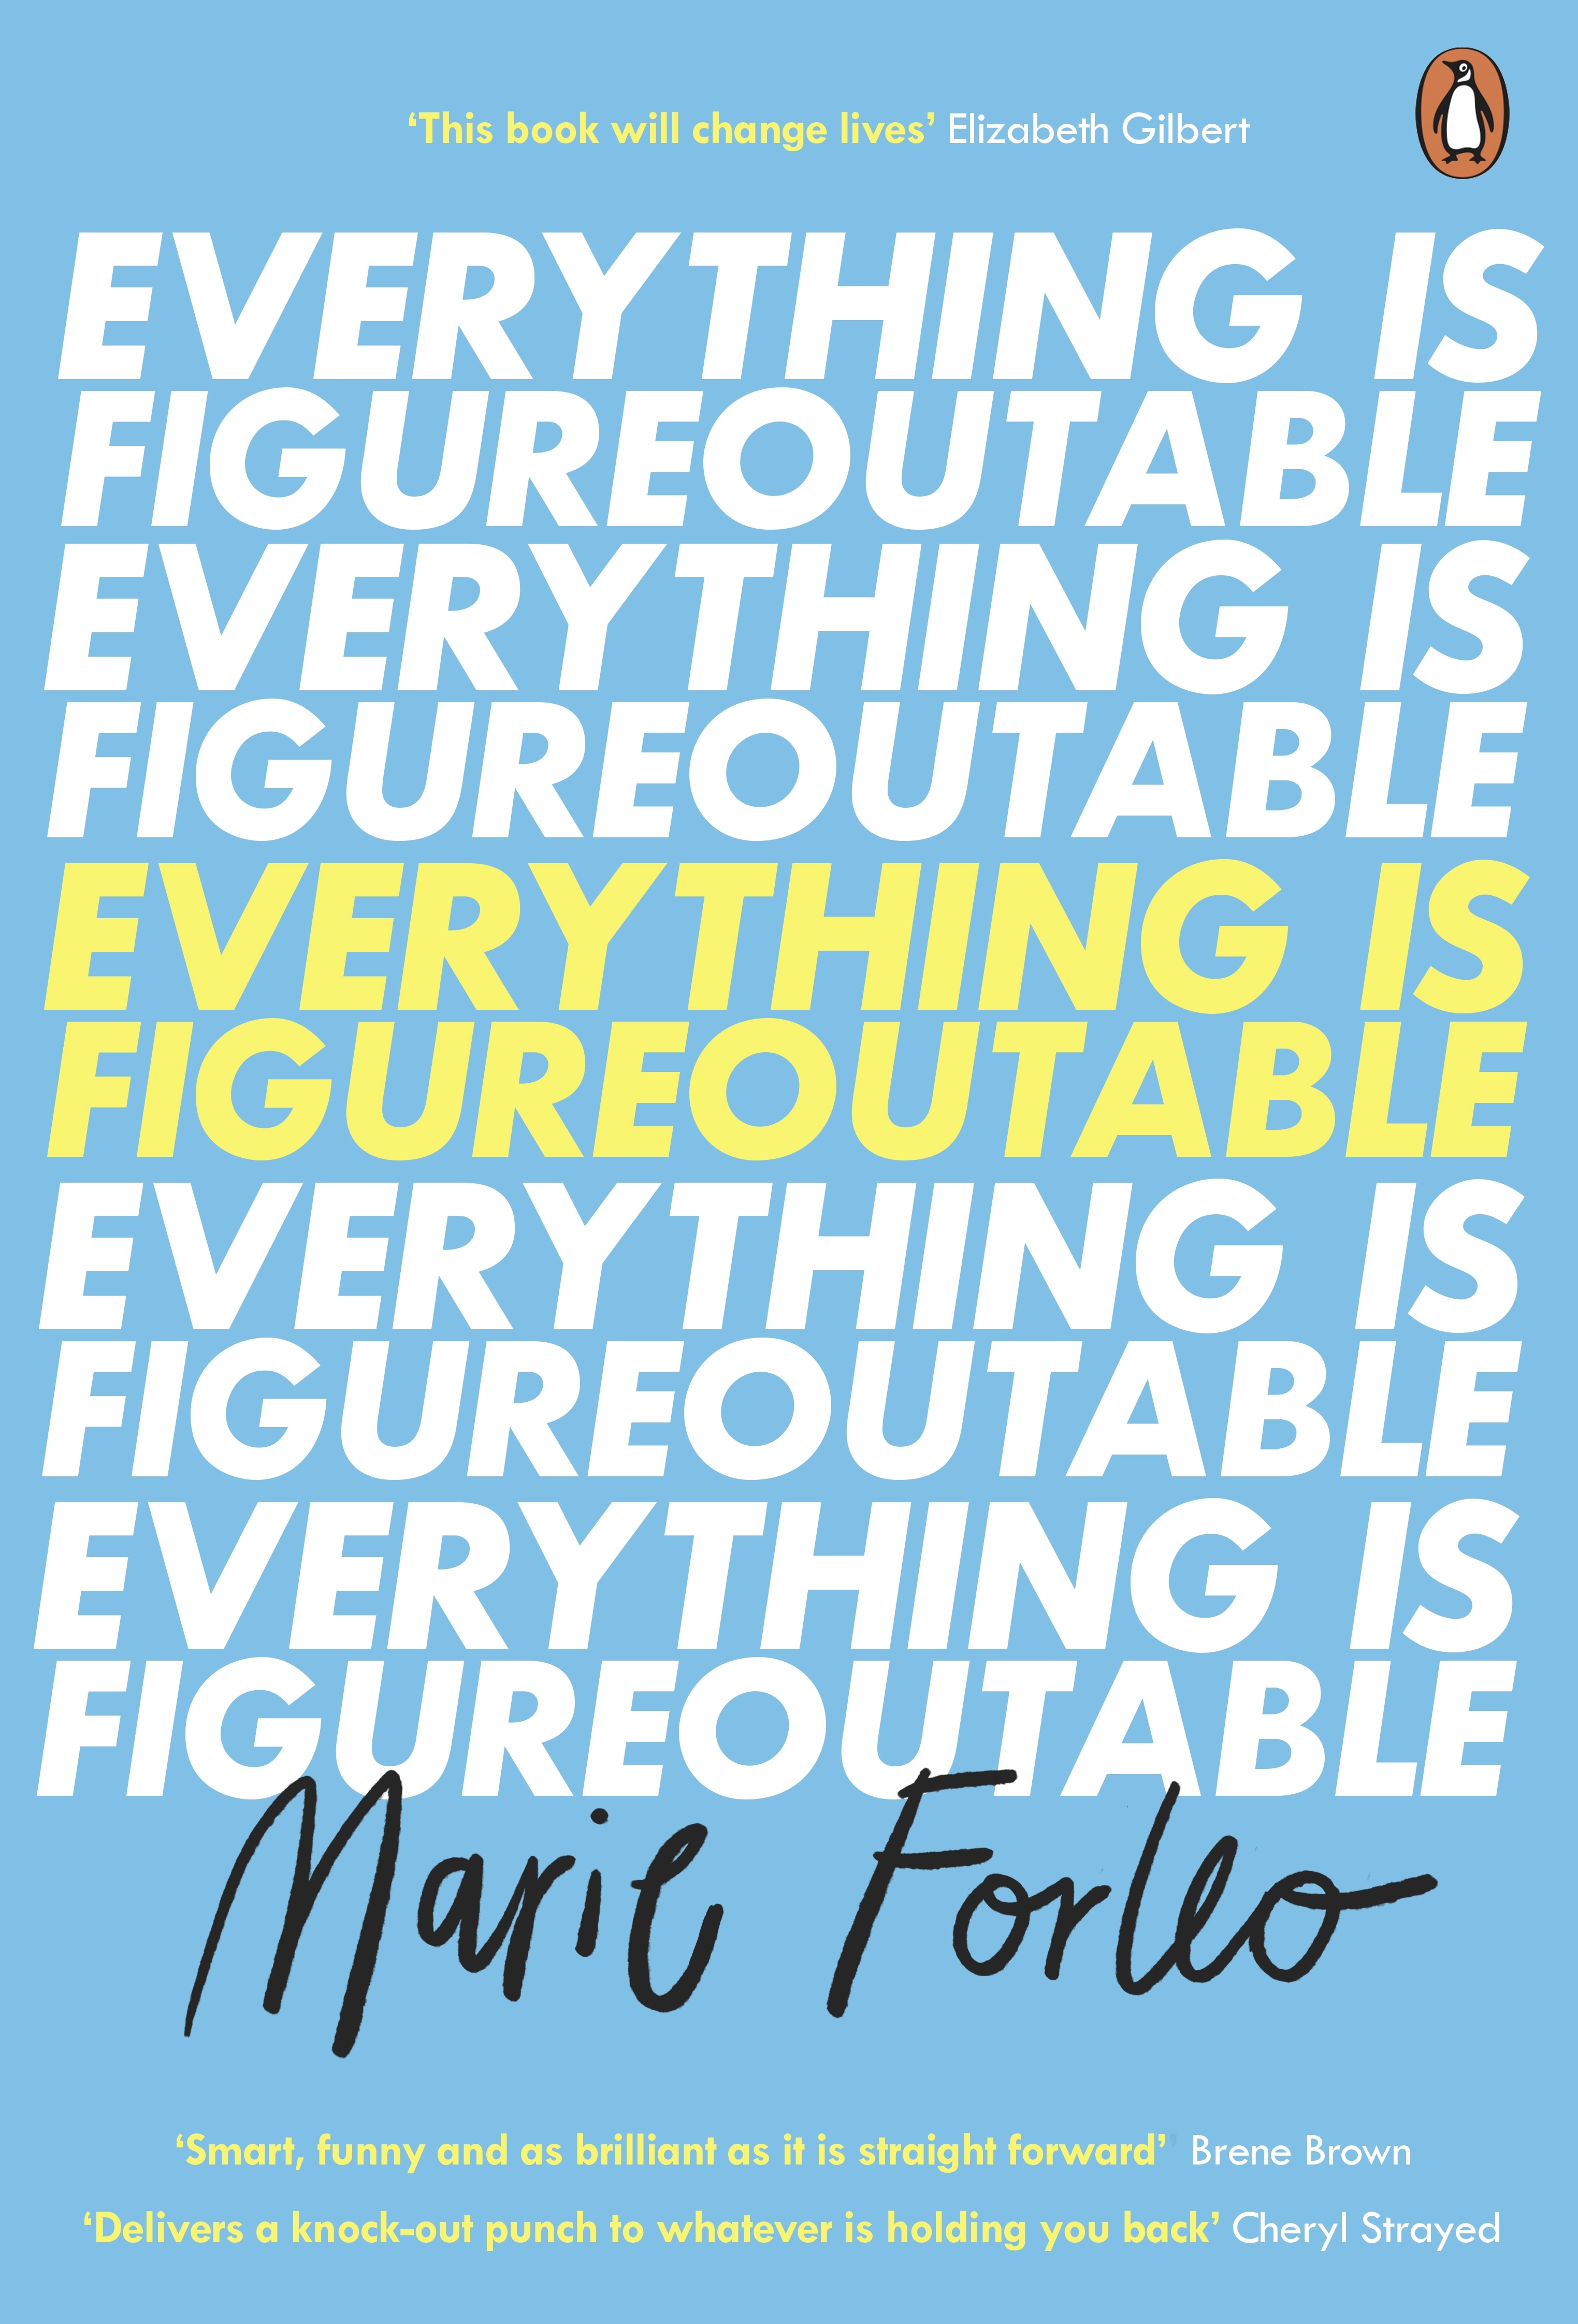 Book “Everything is Figureoutable” by Marie Forleo — December 31, 2020